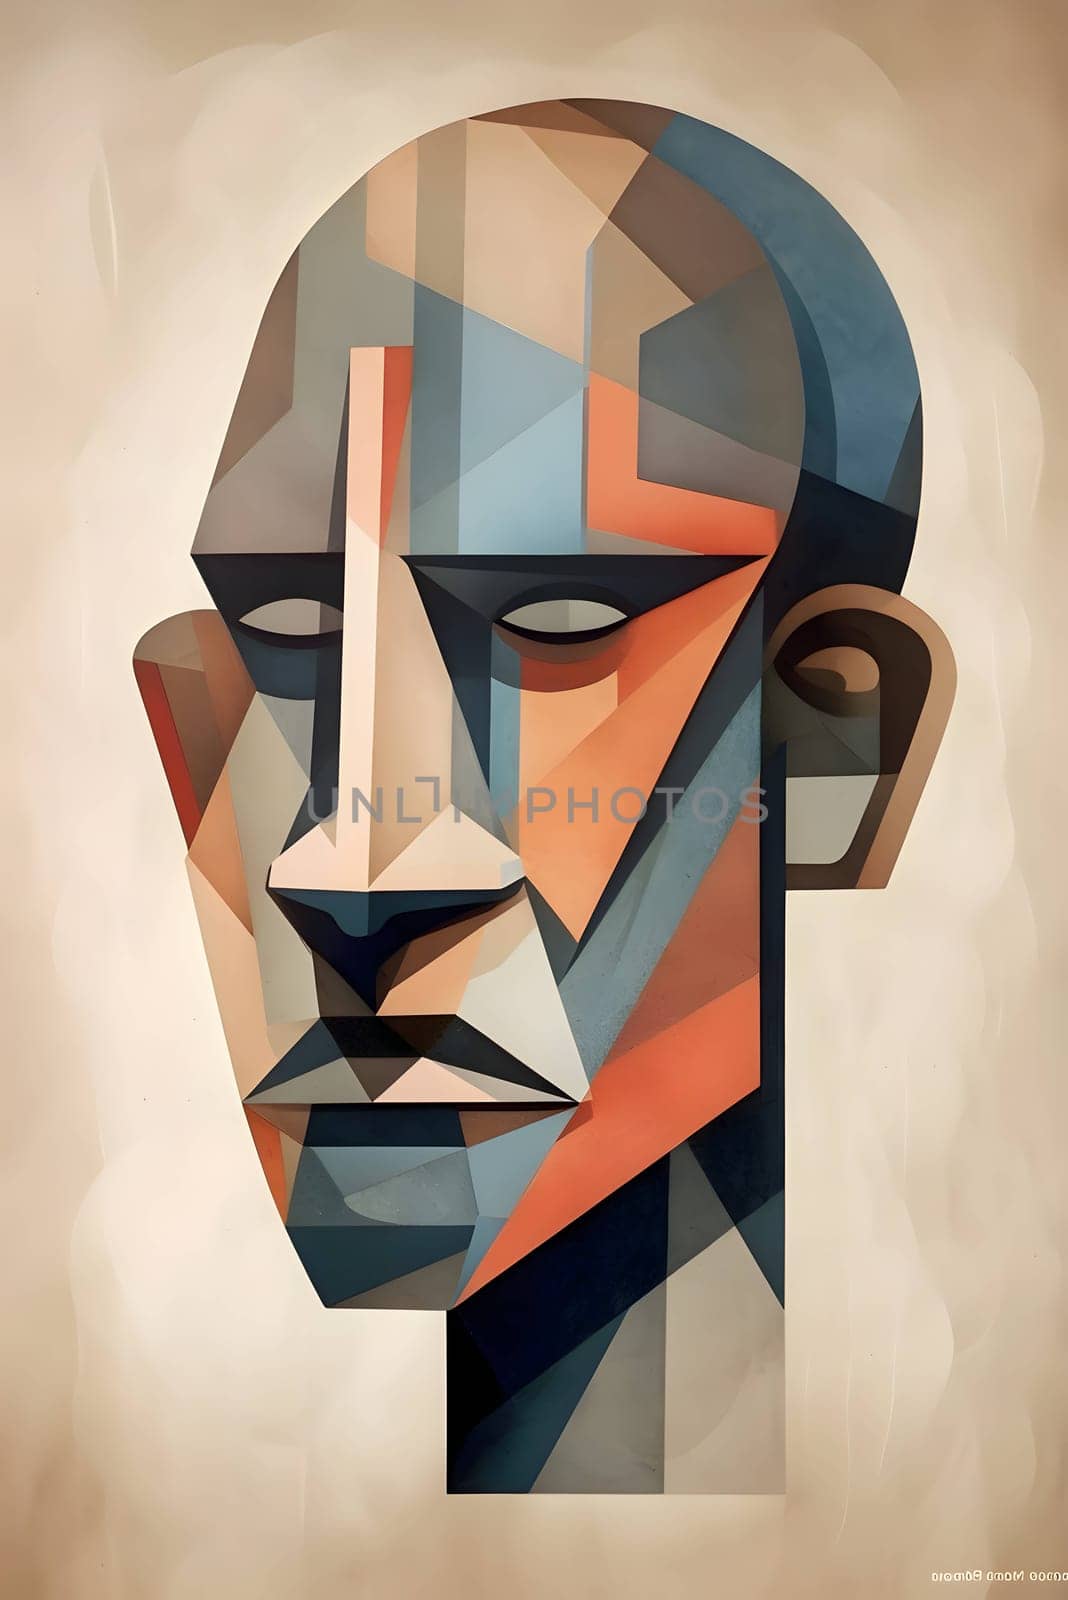 Abstract illustration: Abstract portrait of a man combined with geometric shapes. Vector illustration.